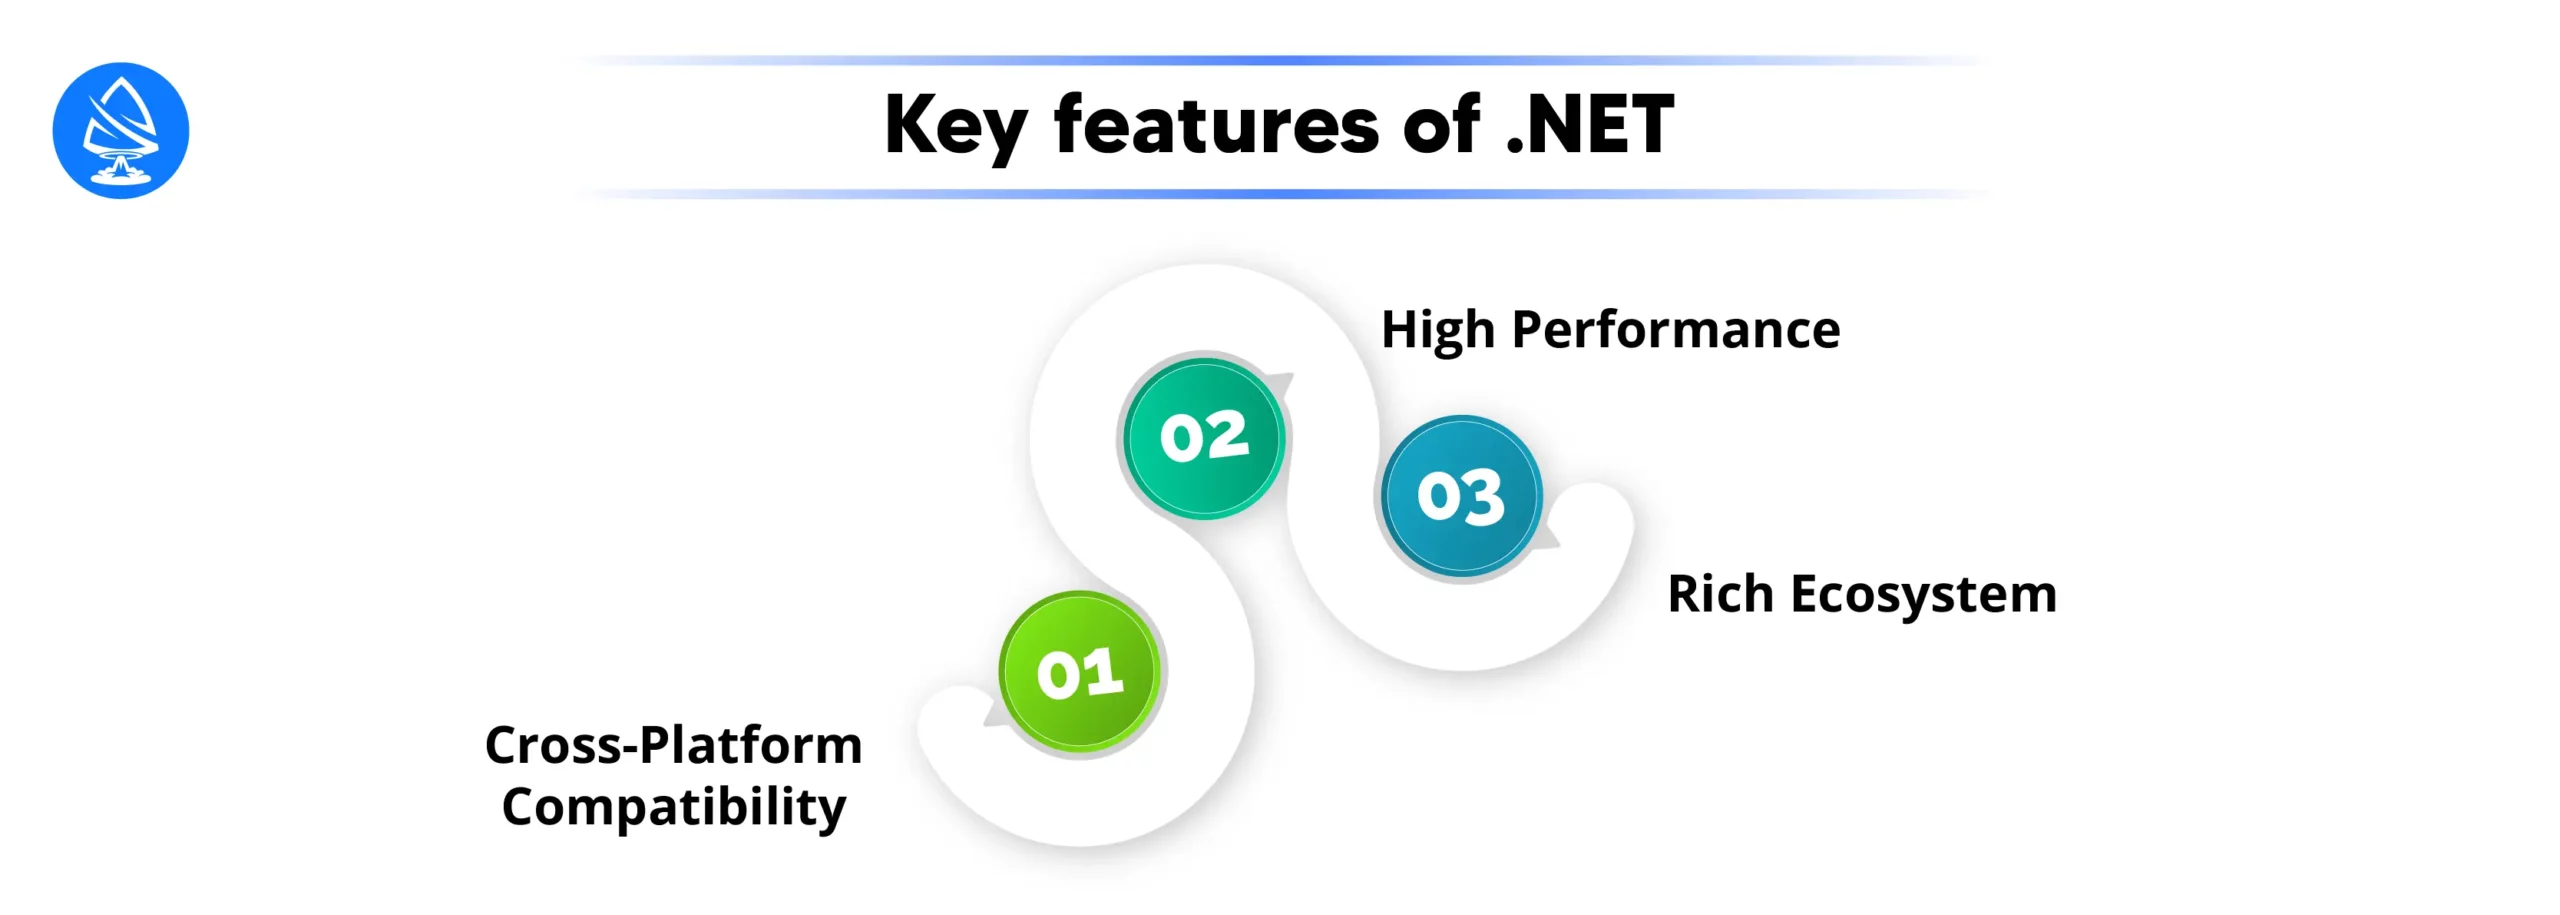 Key Features of .NET 